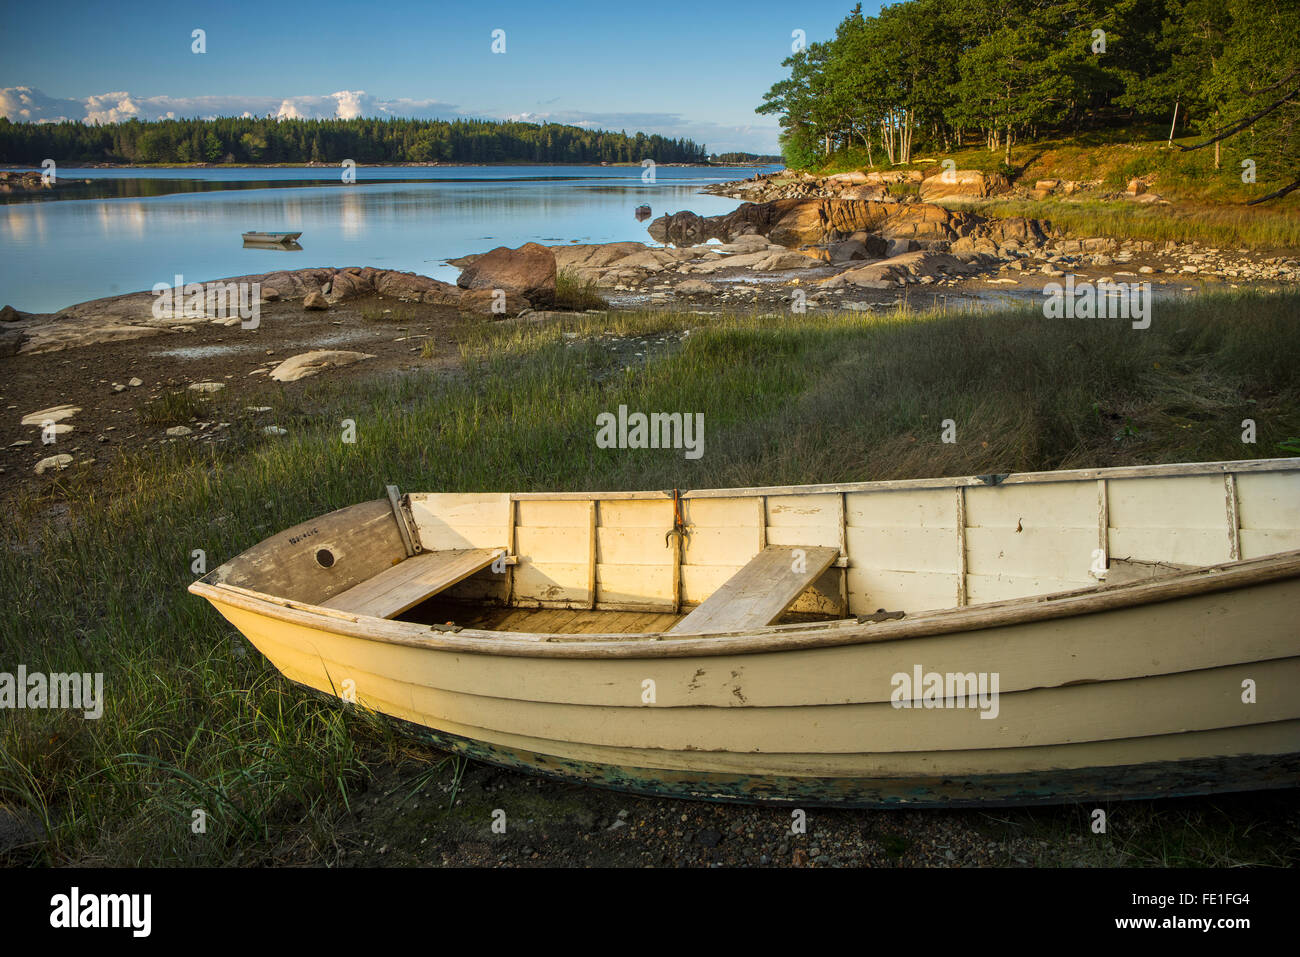 Deer Isle, Maine: Wooden row boat in a quiet cove of Deer Isle Stock Photo